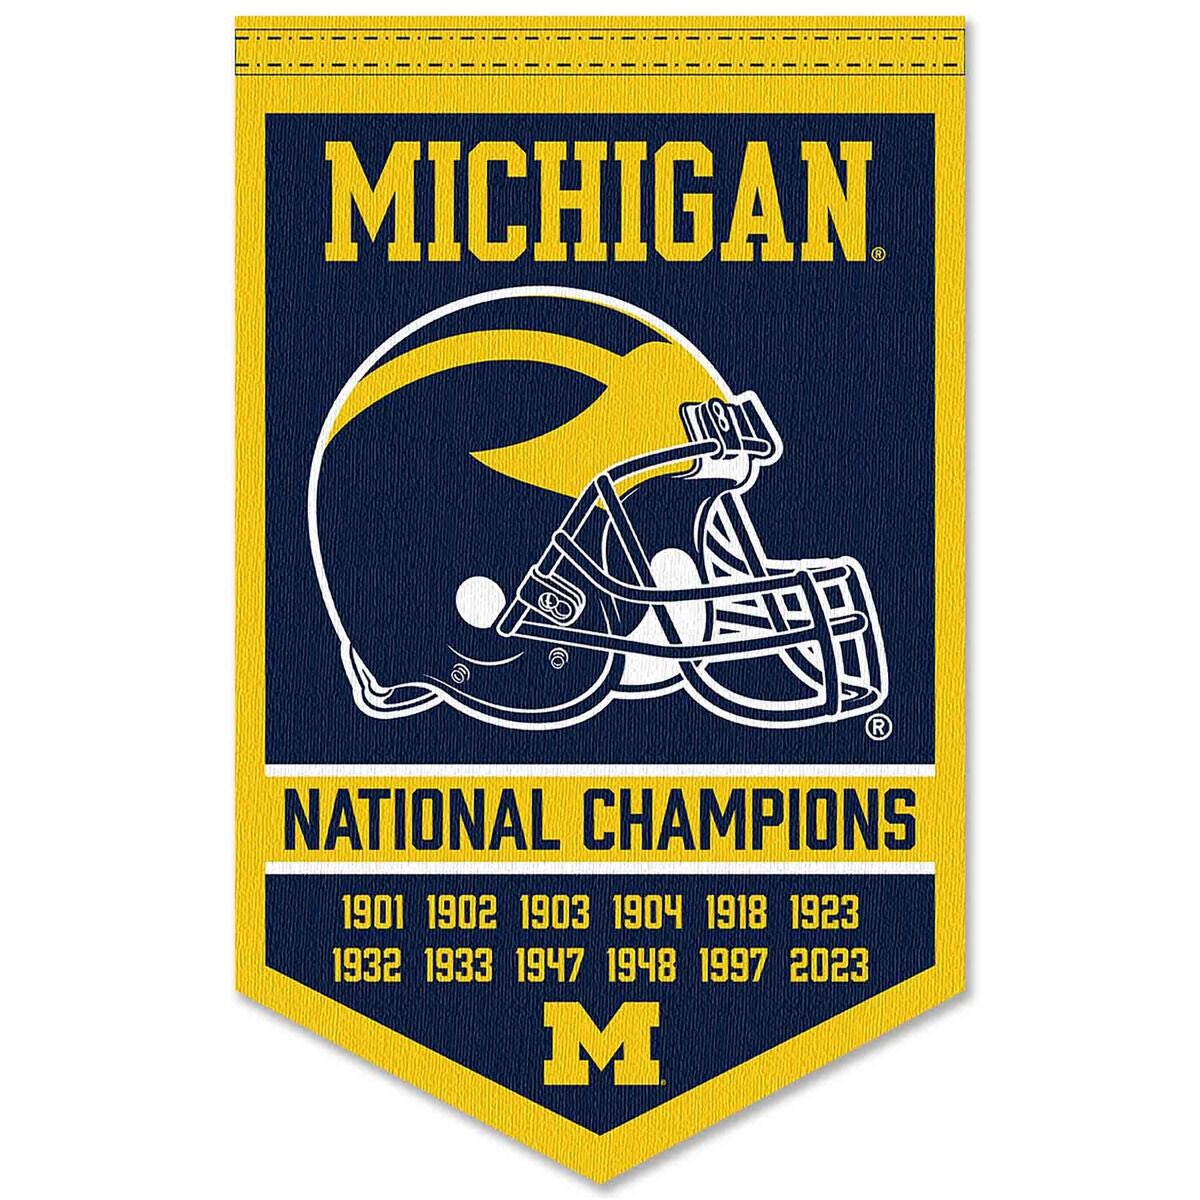 Excited to be at the University of Michigan spring practice on April 5th! Can’t wait to get on campus, watch practice, and get to know the coaches and learn more about the program. @UMichFootball @Coach_SMoore @CoachWinkUM @19Bellamy @MEMCoachEspo @cderute @itskaylij…